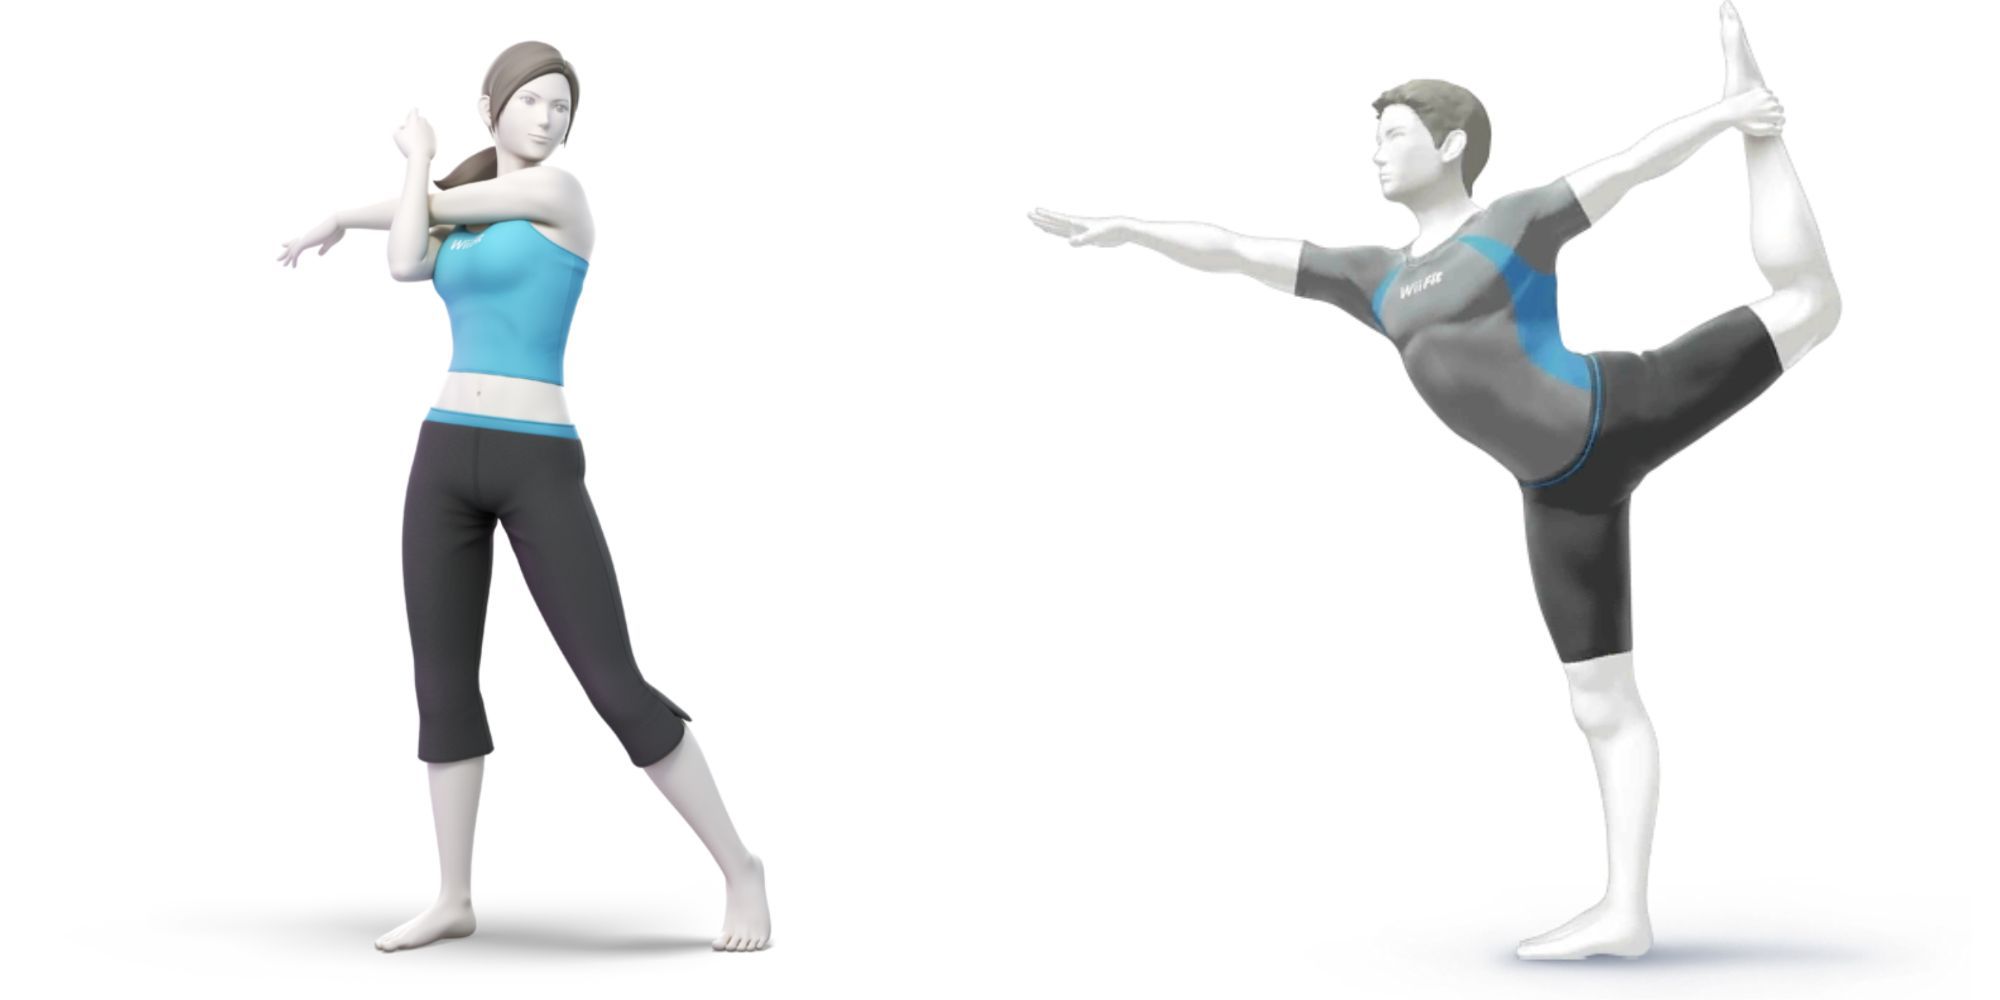 Nintendo Wii Fit Trainers, the female stretching her arms and the male lifting his leg up high